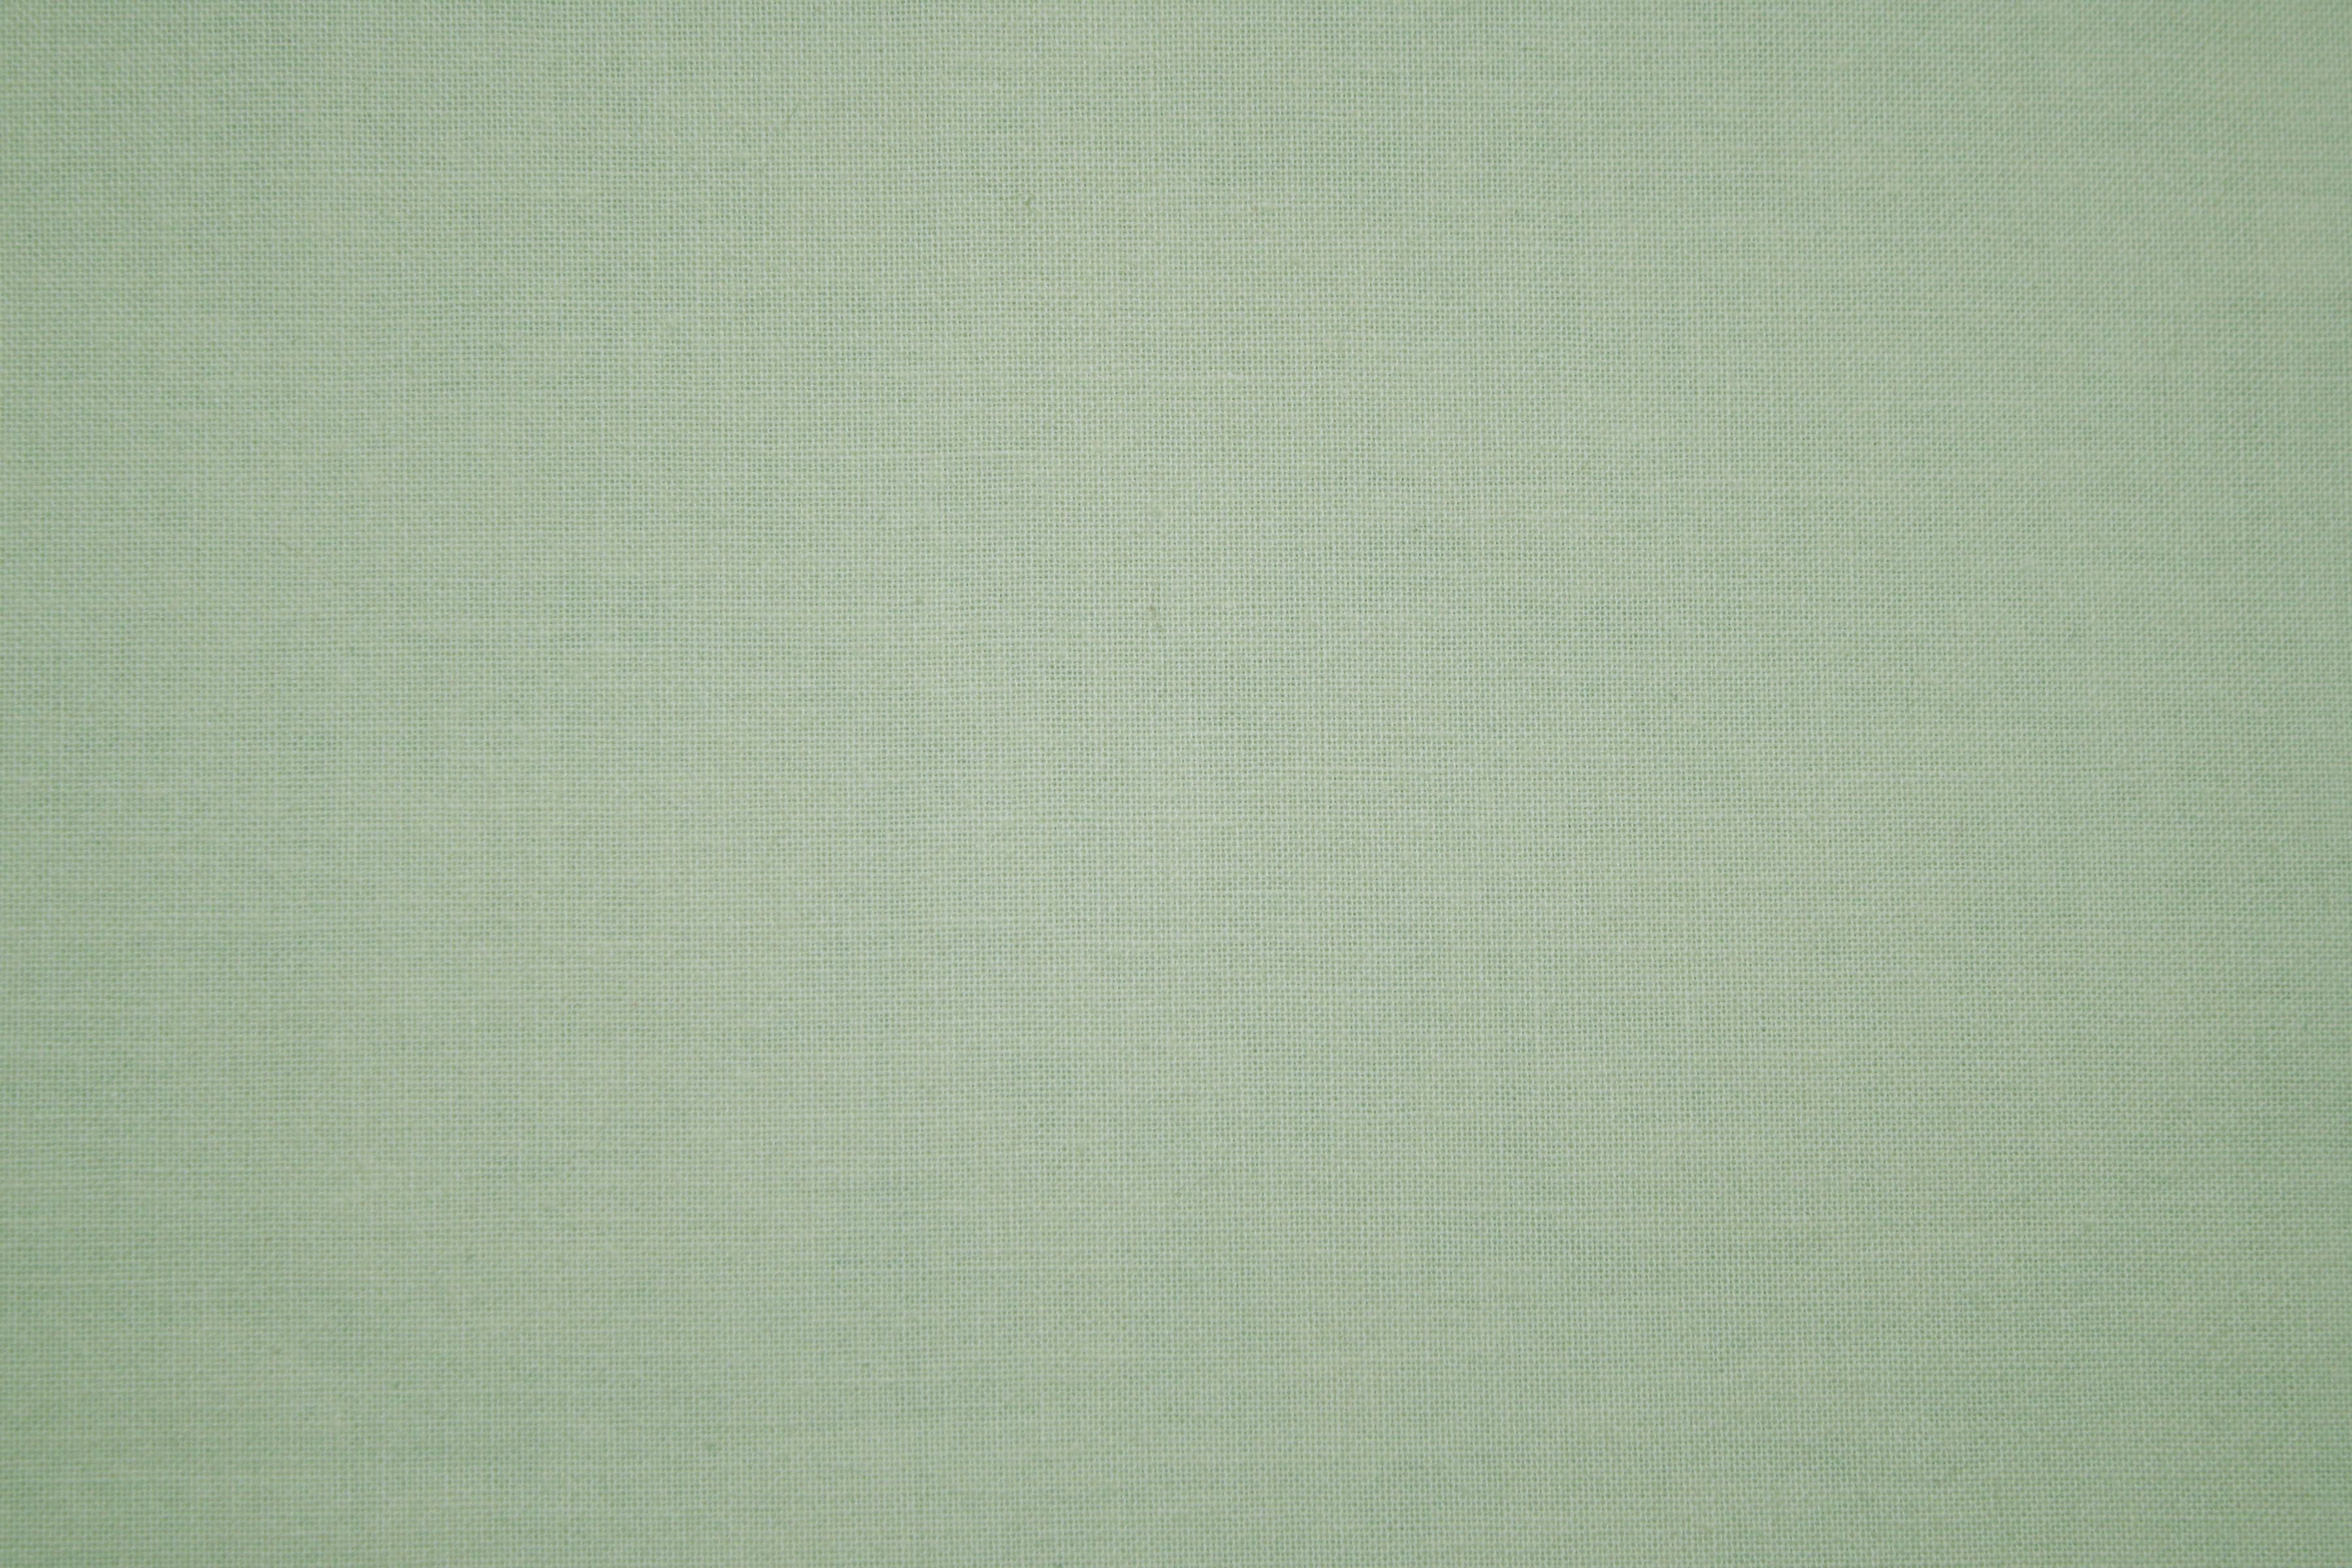 A light green background with horizontal lines. - Sage green